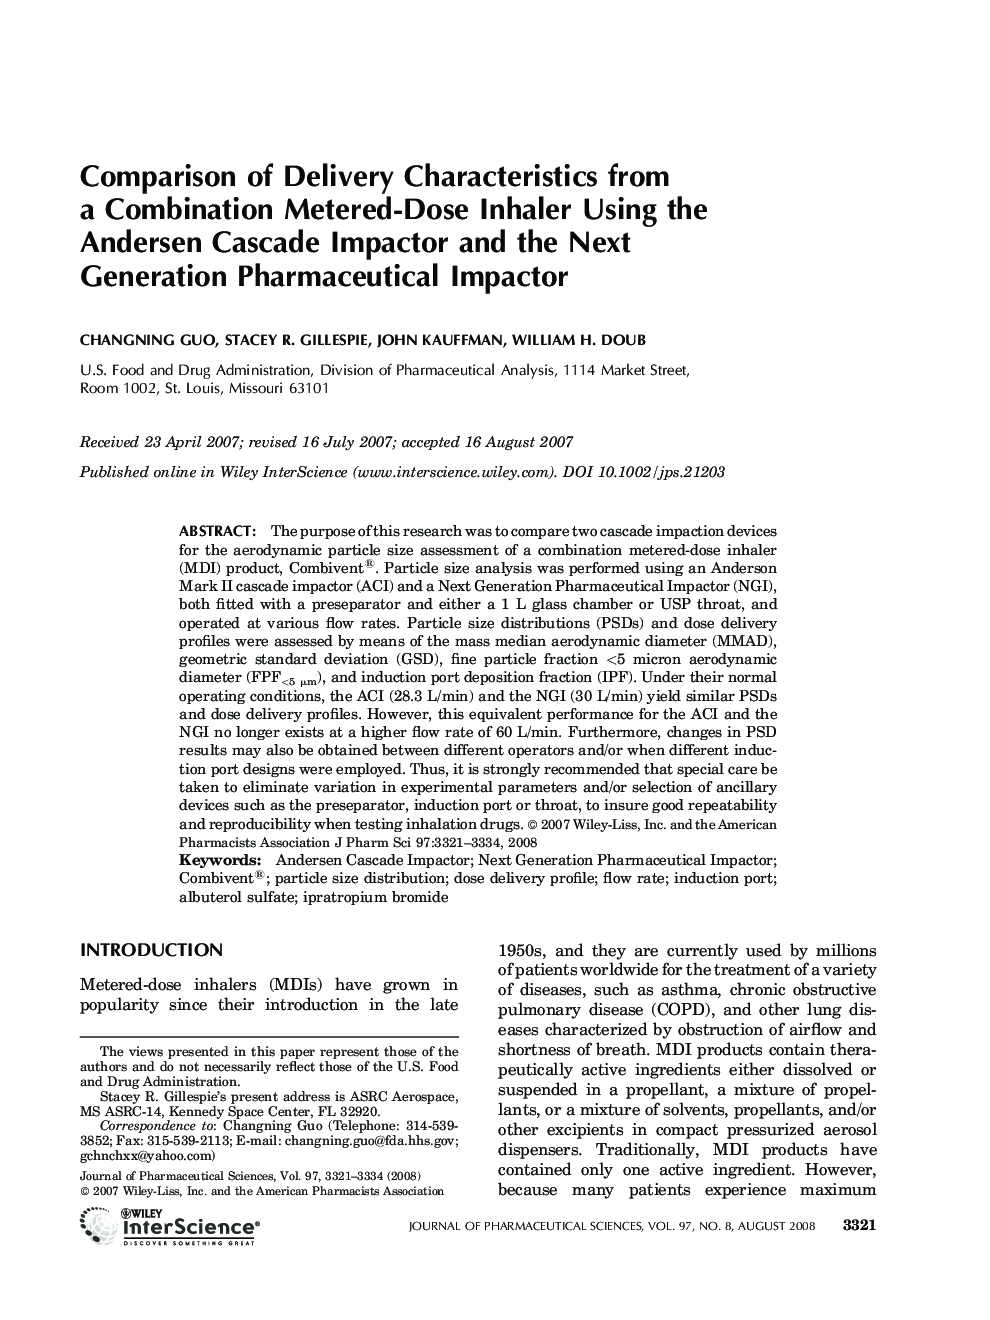 Comparison of Delivery Characteristics from a Combination Metered-Dose Inhaler Using the Andersen Cascade Impactor and the Next Generation Pharmaceutical Impactor